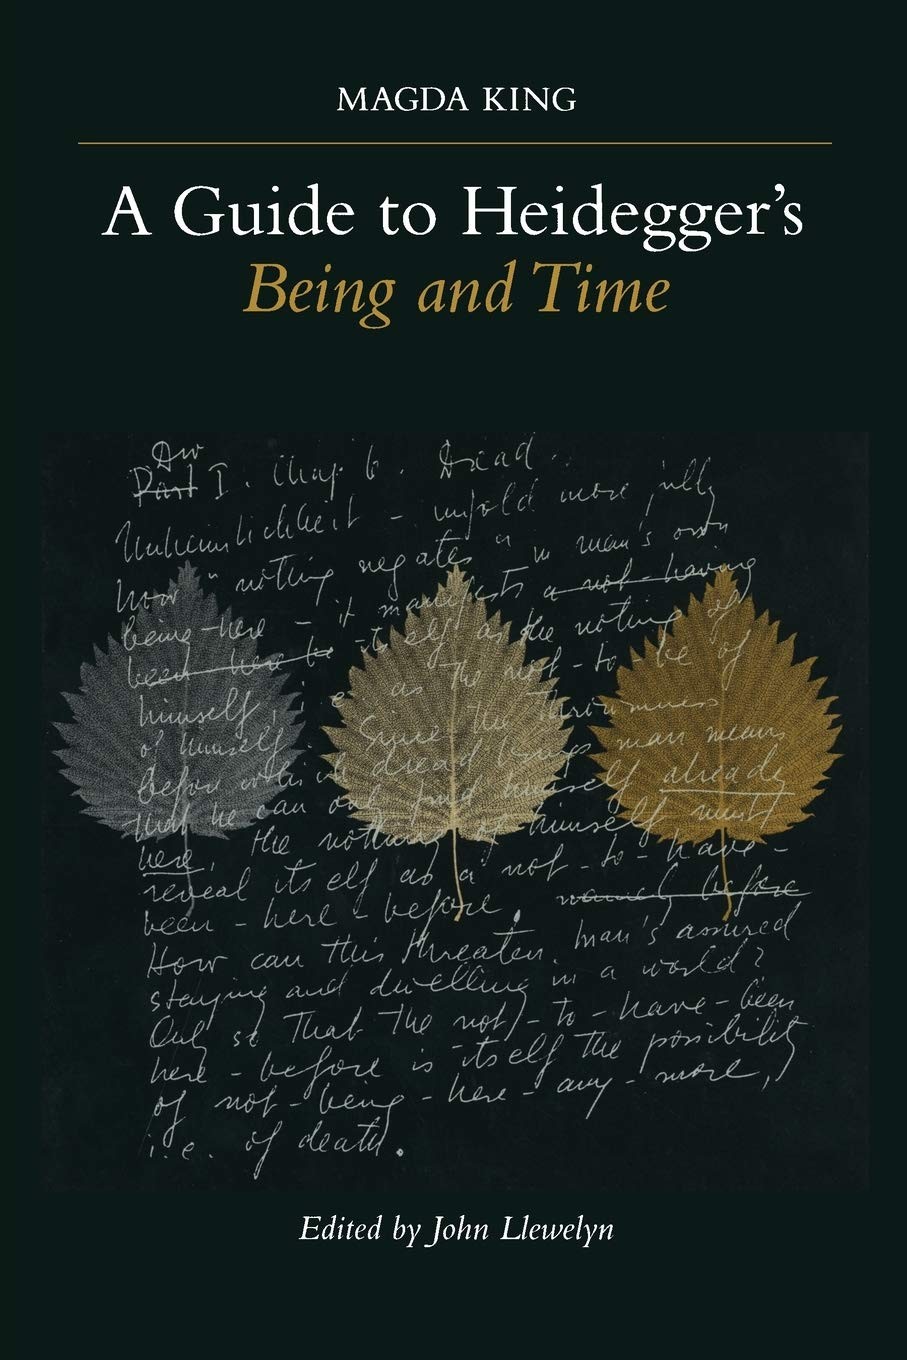 A guide to Heidegger’s Being and time